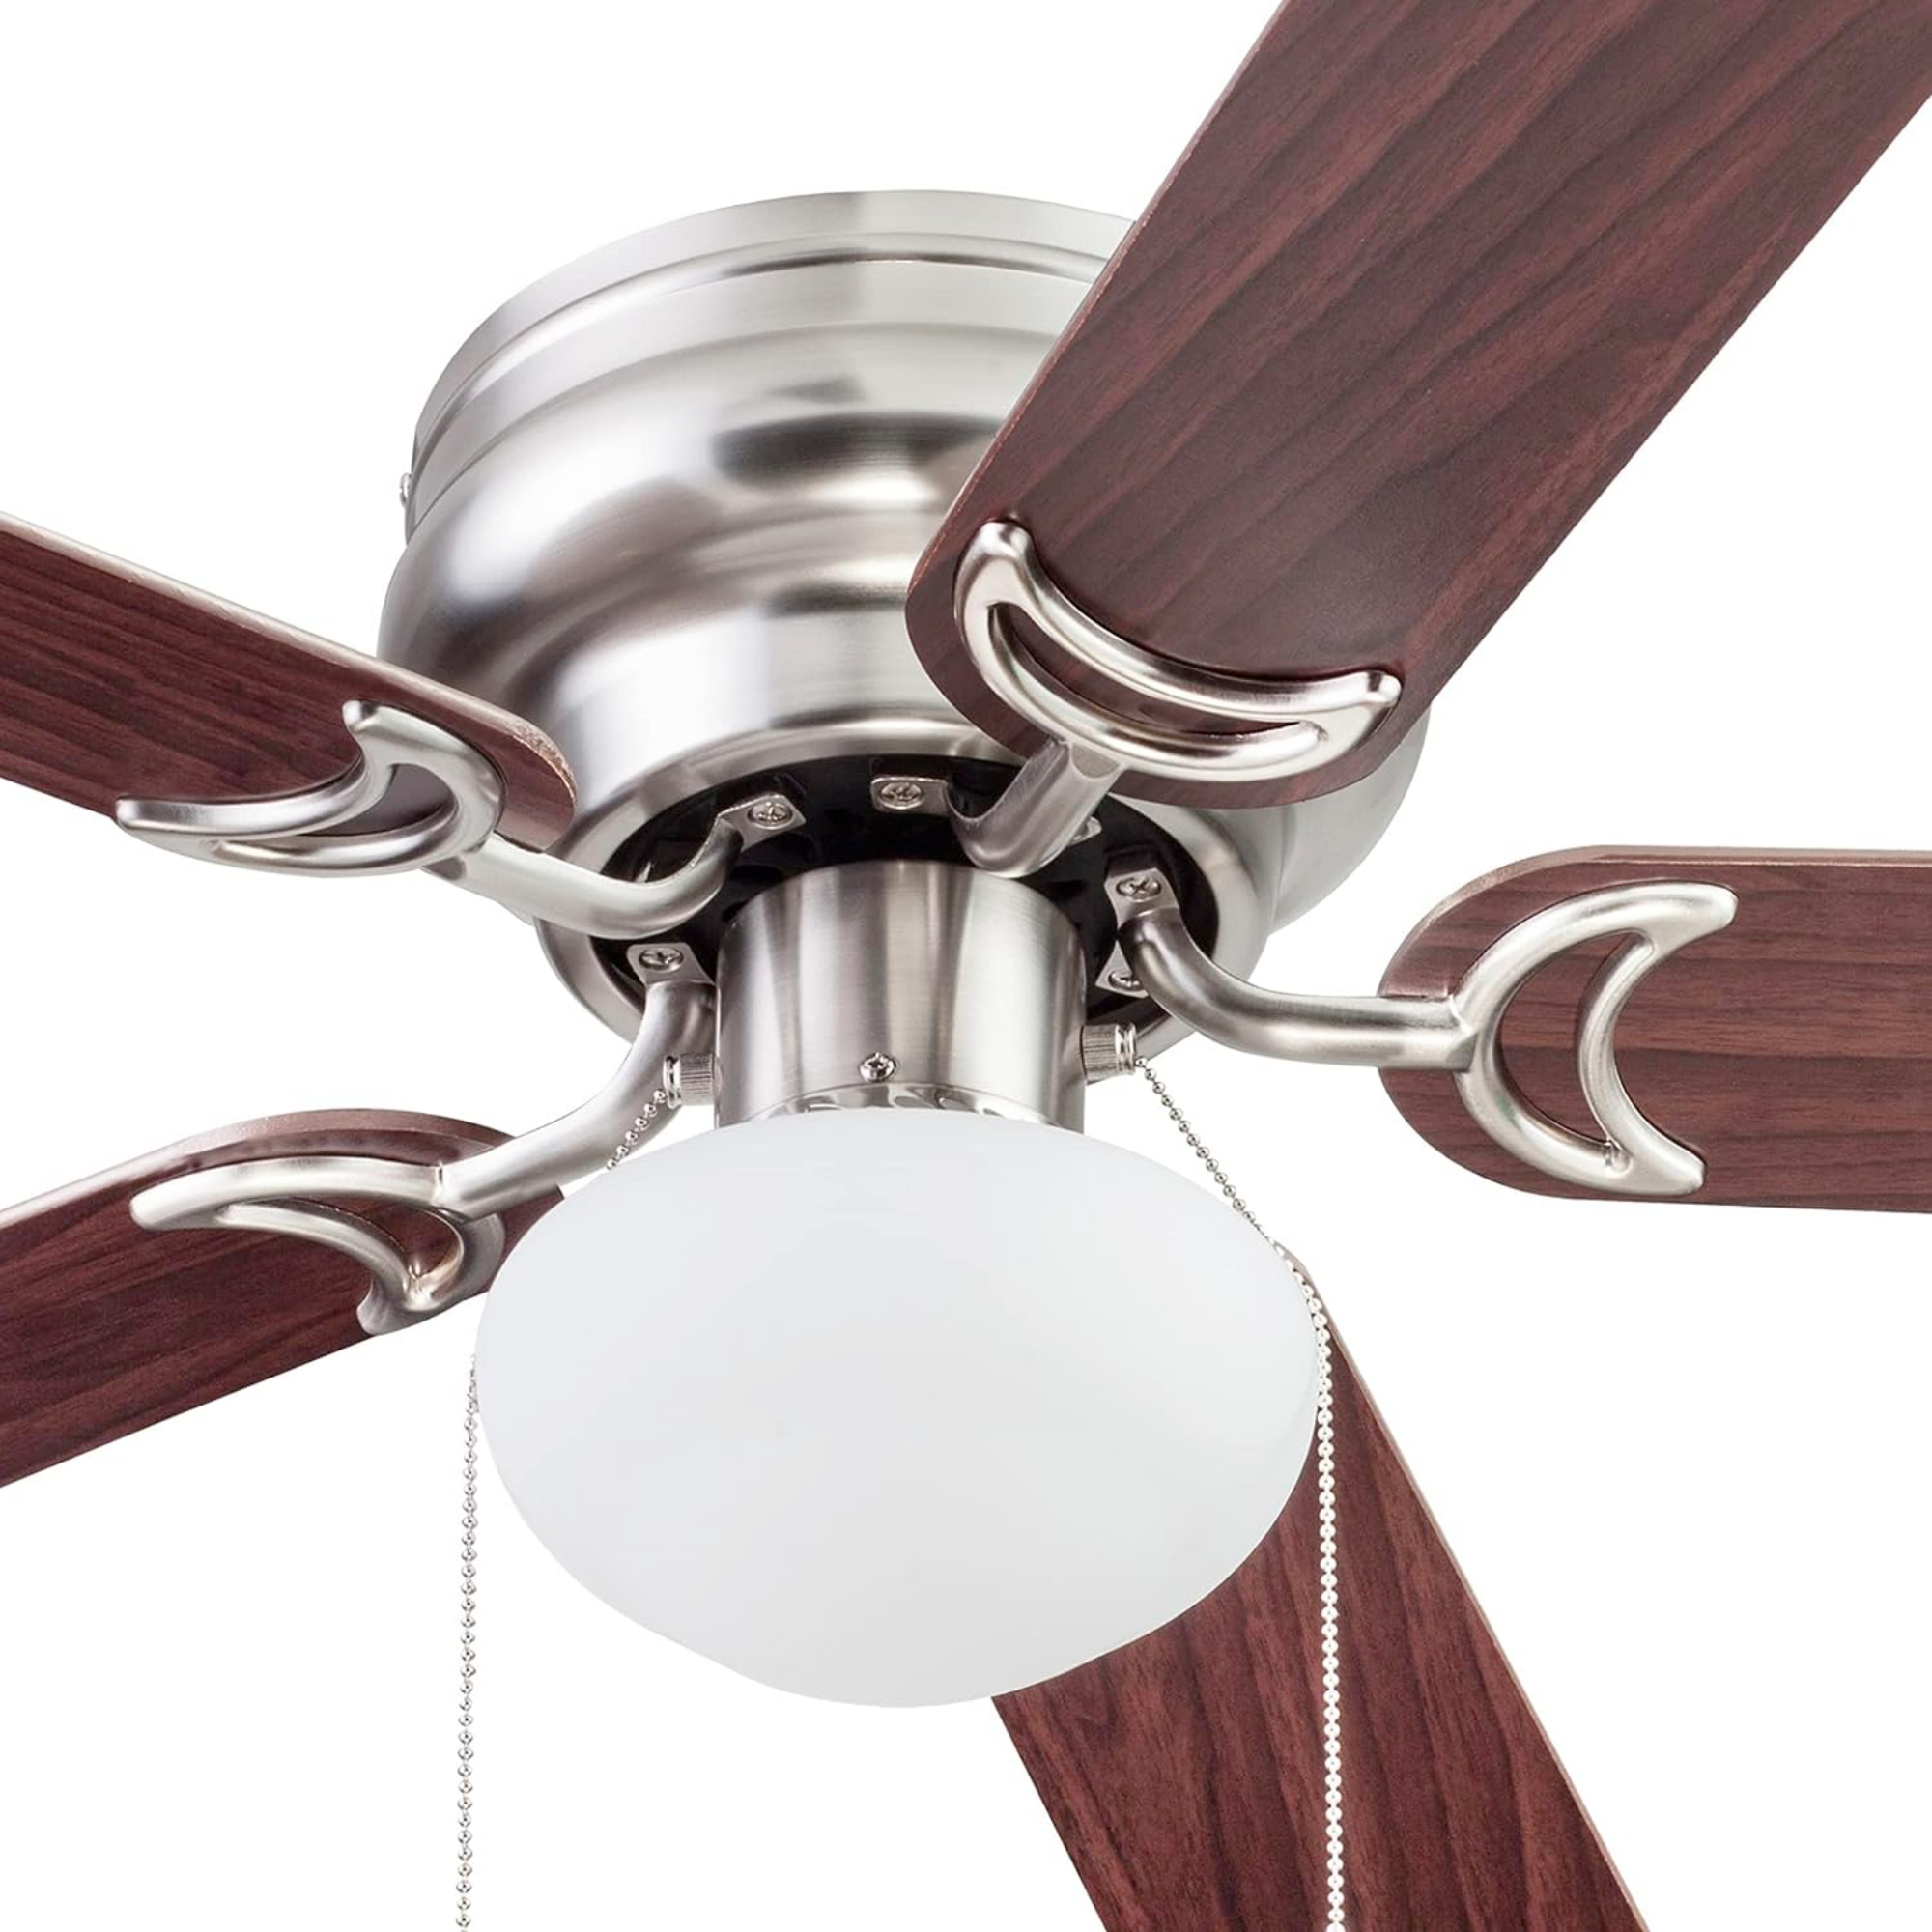 44 Inch Alvina, Satin Nickel, Pull Chain, Ceiling Fan by Prominence Home